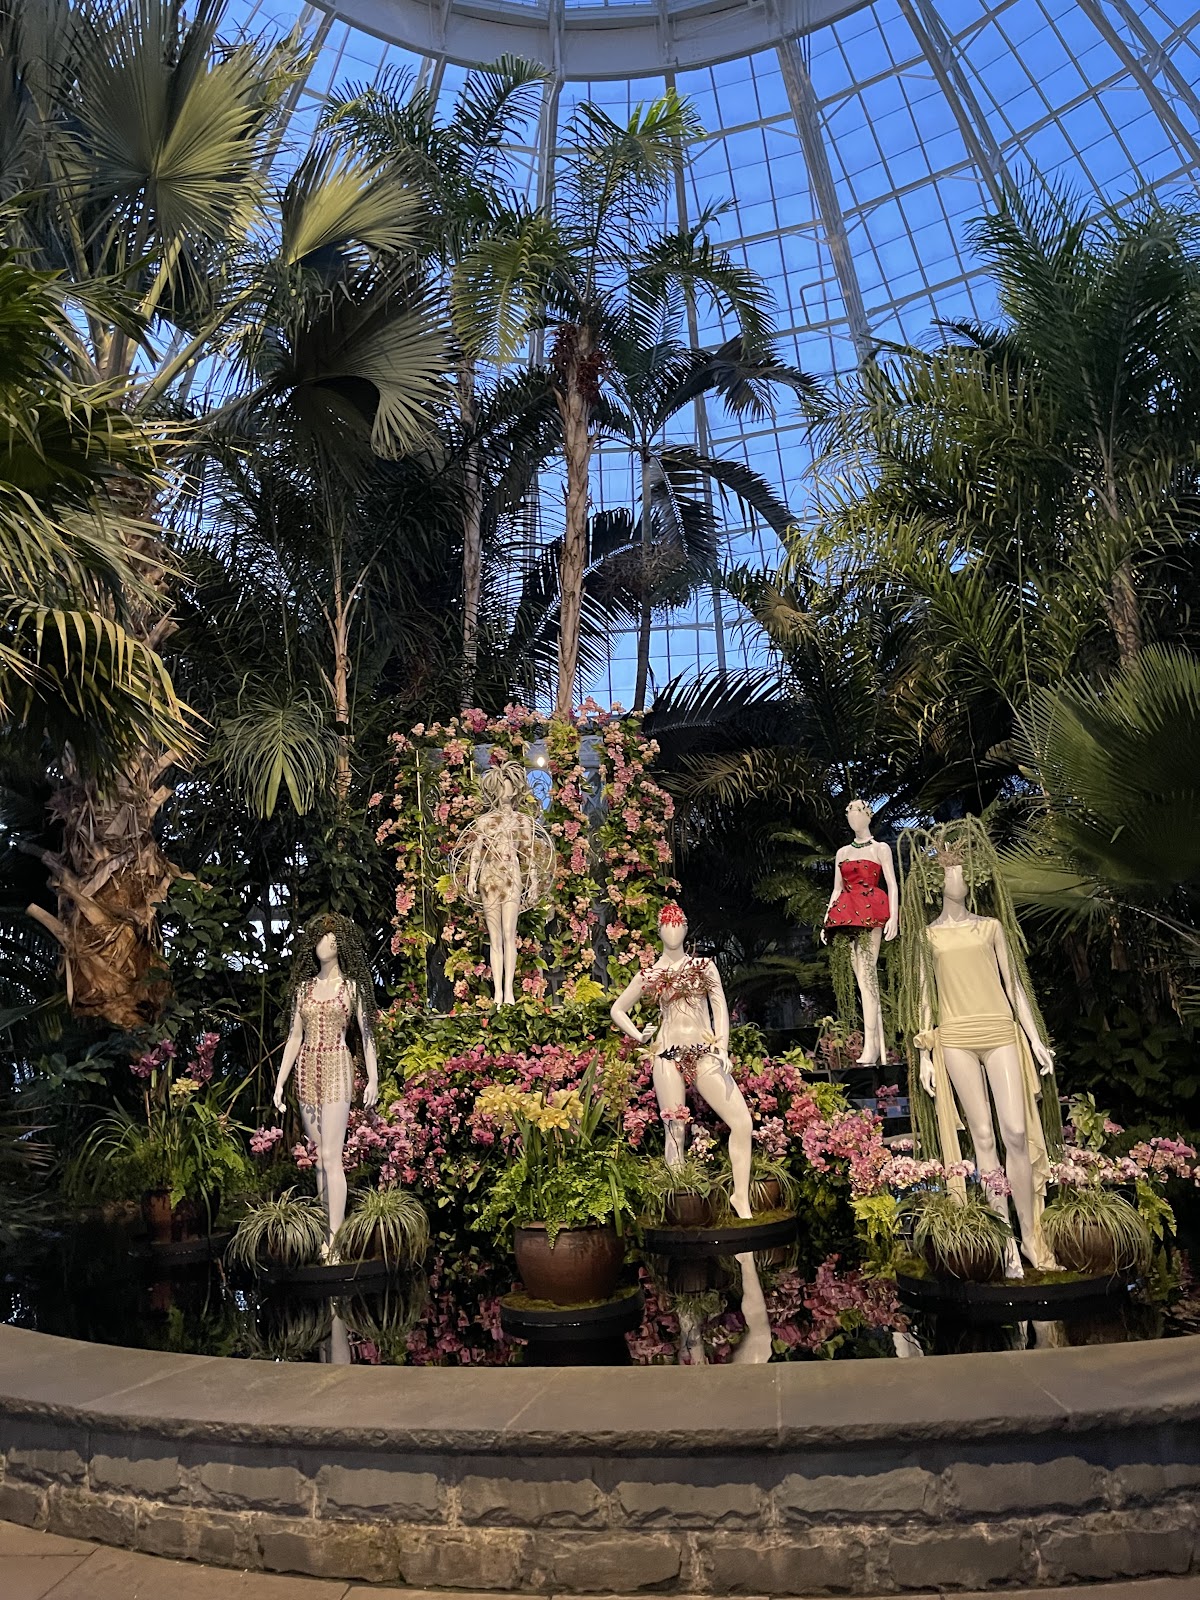 The Orchid Show: Florals in Fashion at New York Botanical Garden